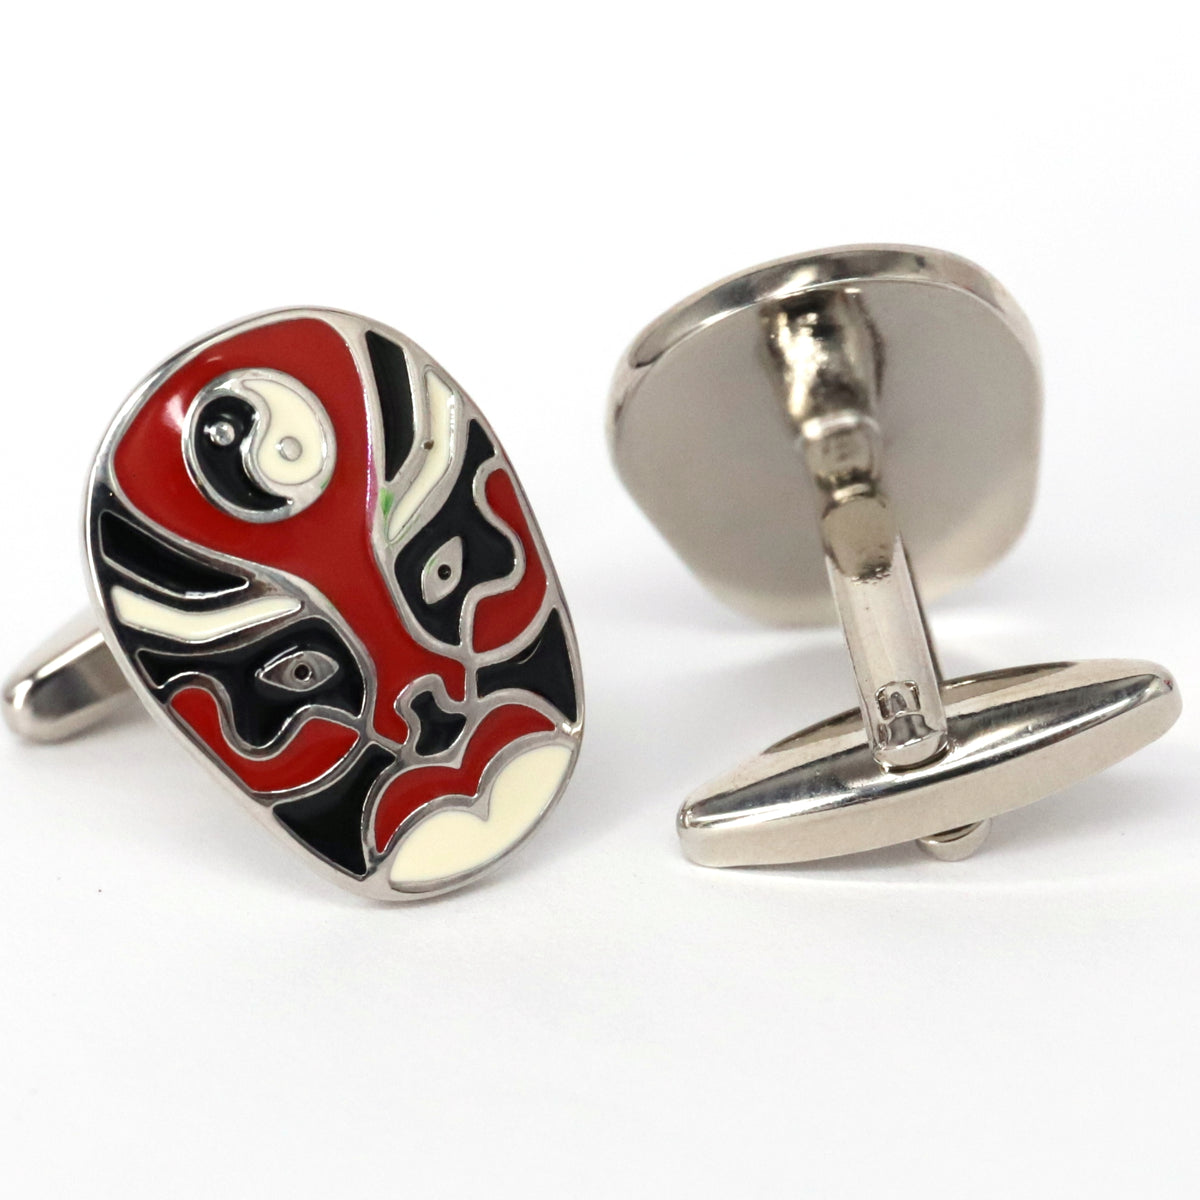 Jing Mask or Chinese Opera mask Black white Cufflinks (Online Exclusive)